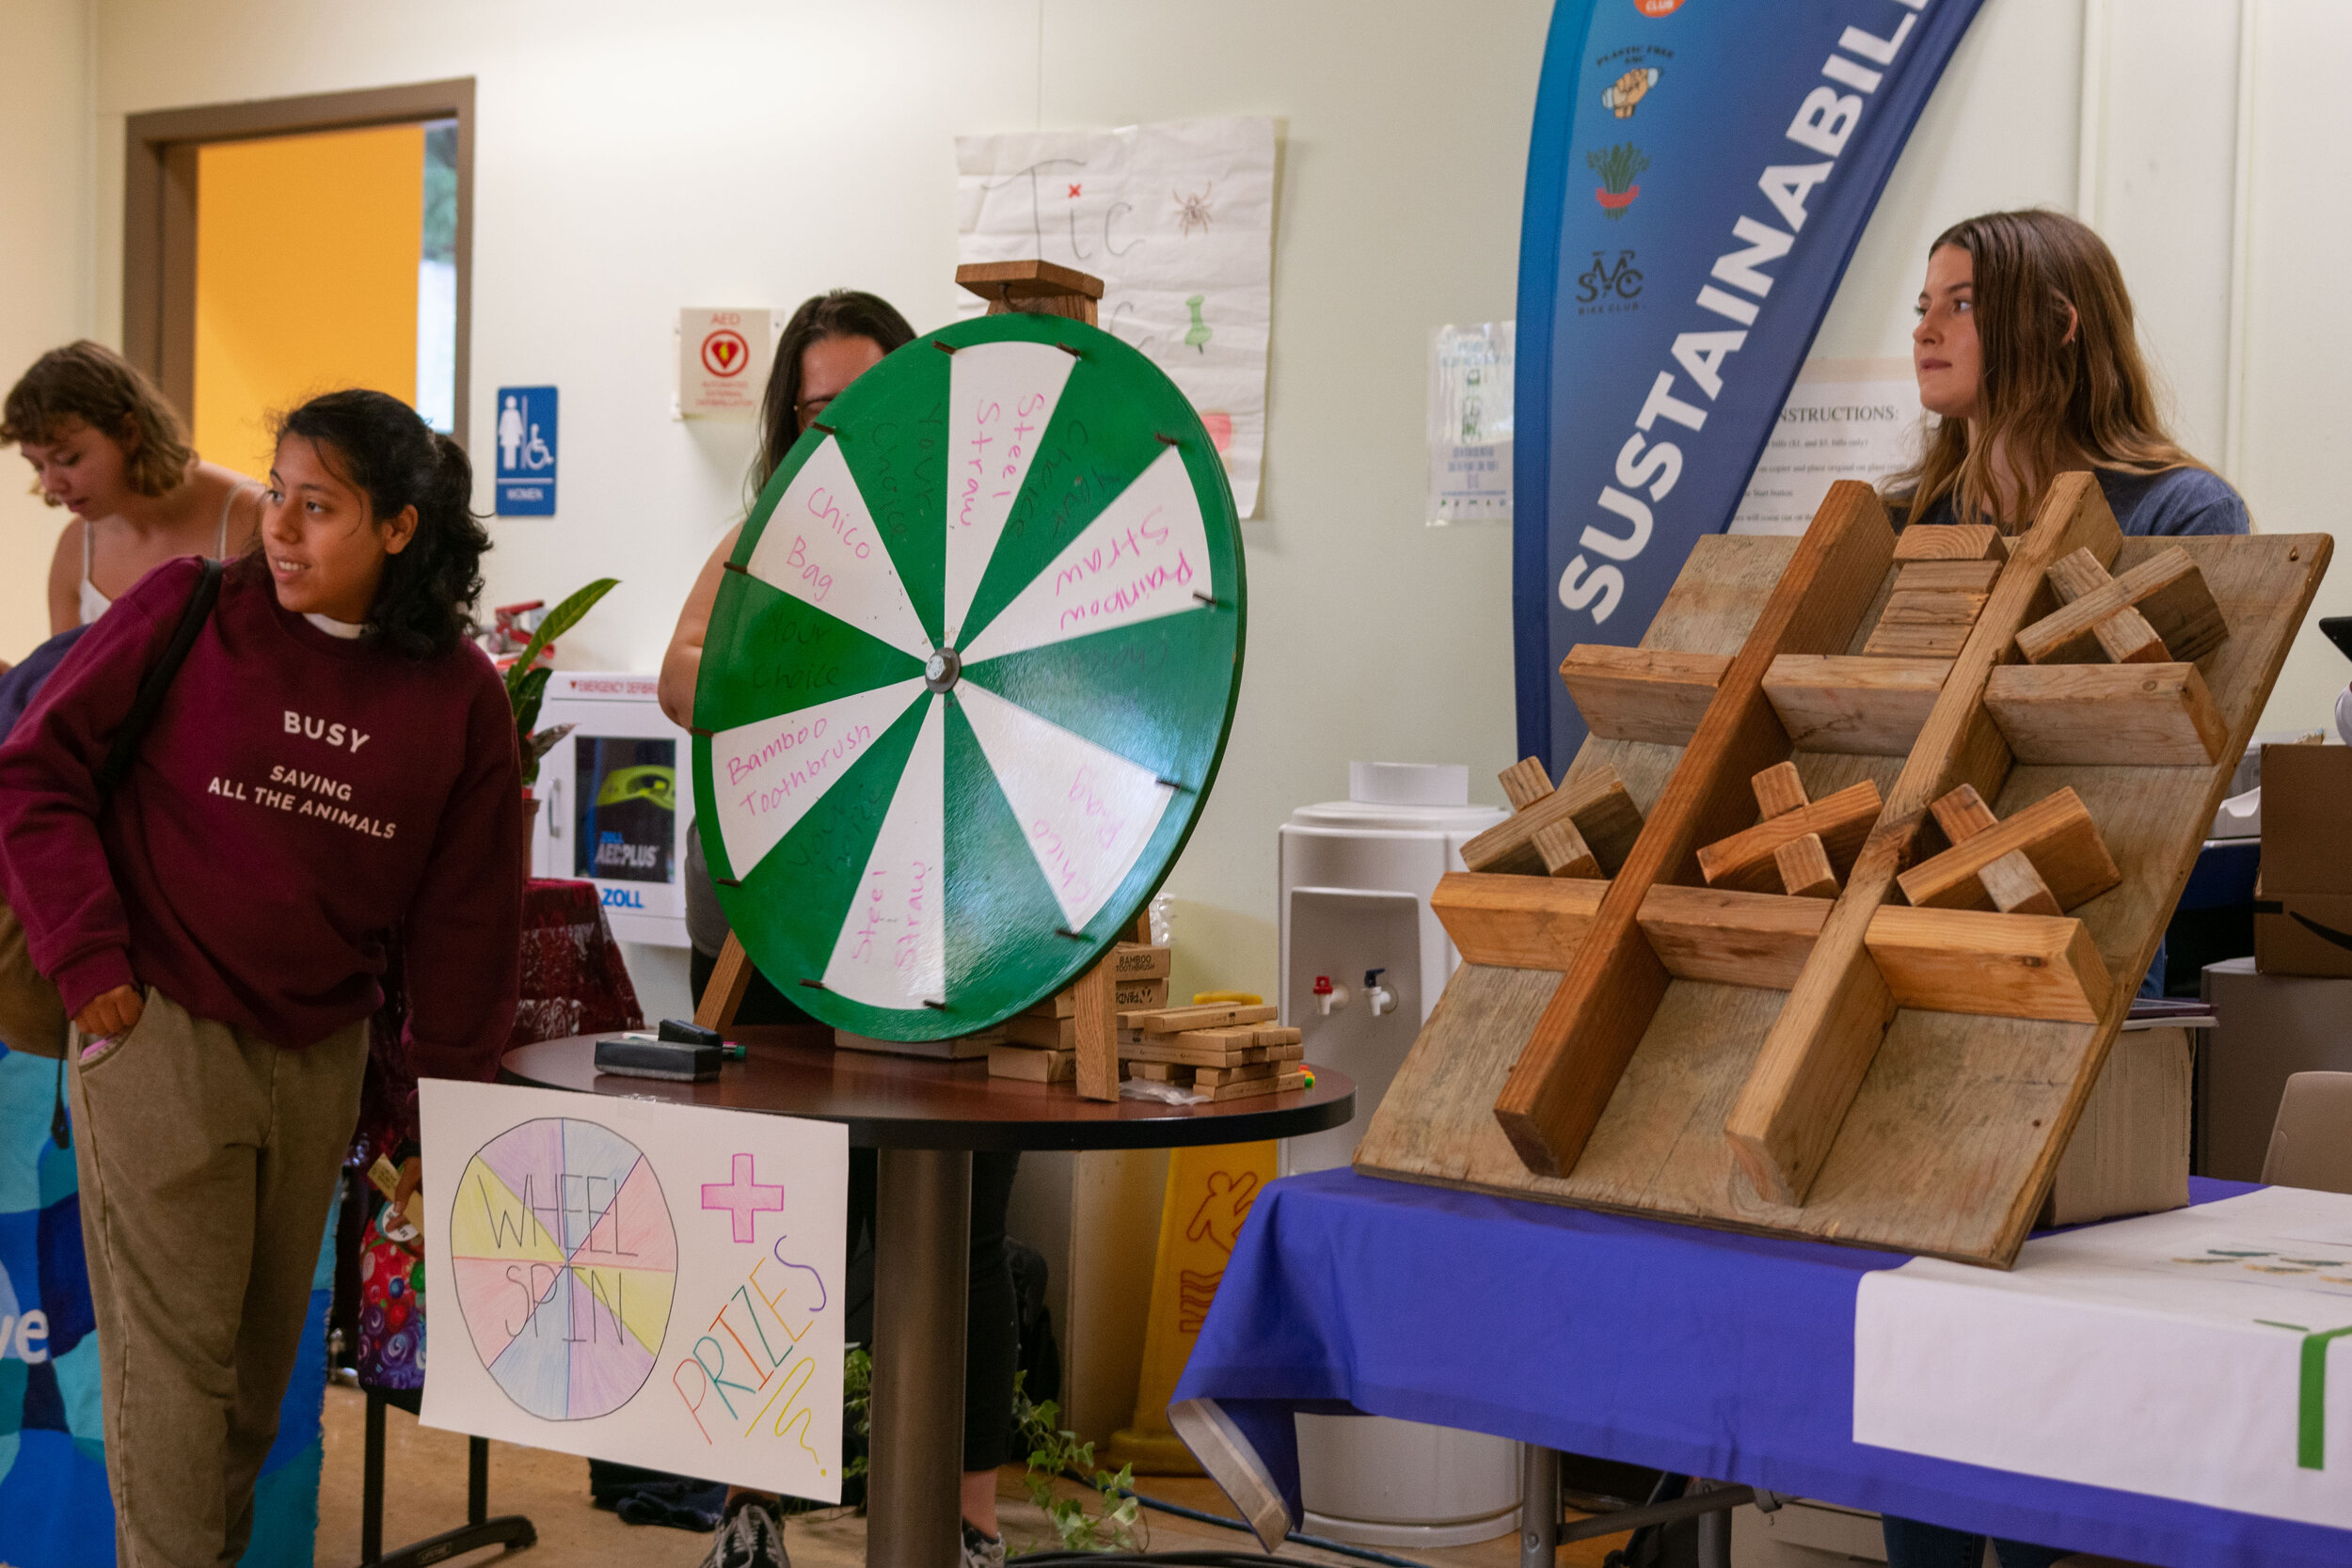  After completing a tour of the tables at the Sustainability Week kickoff event, students can spin a wheel to win a prize. (Conner Savage/The Corsair) 